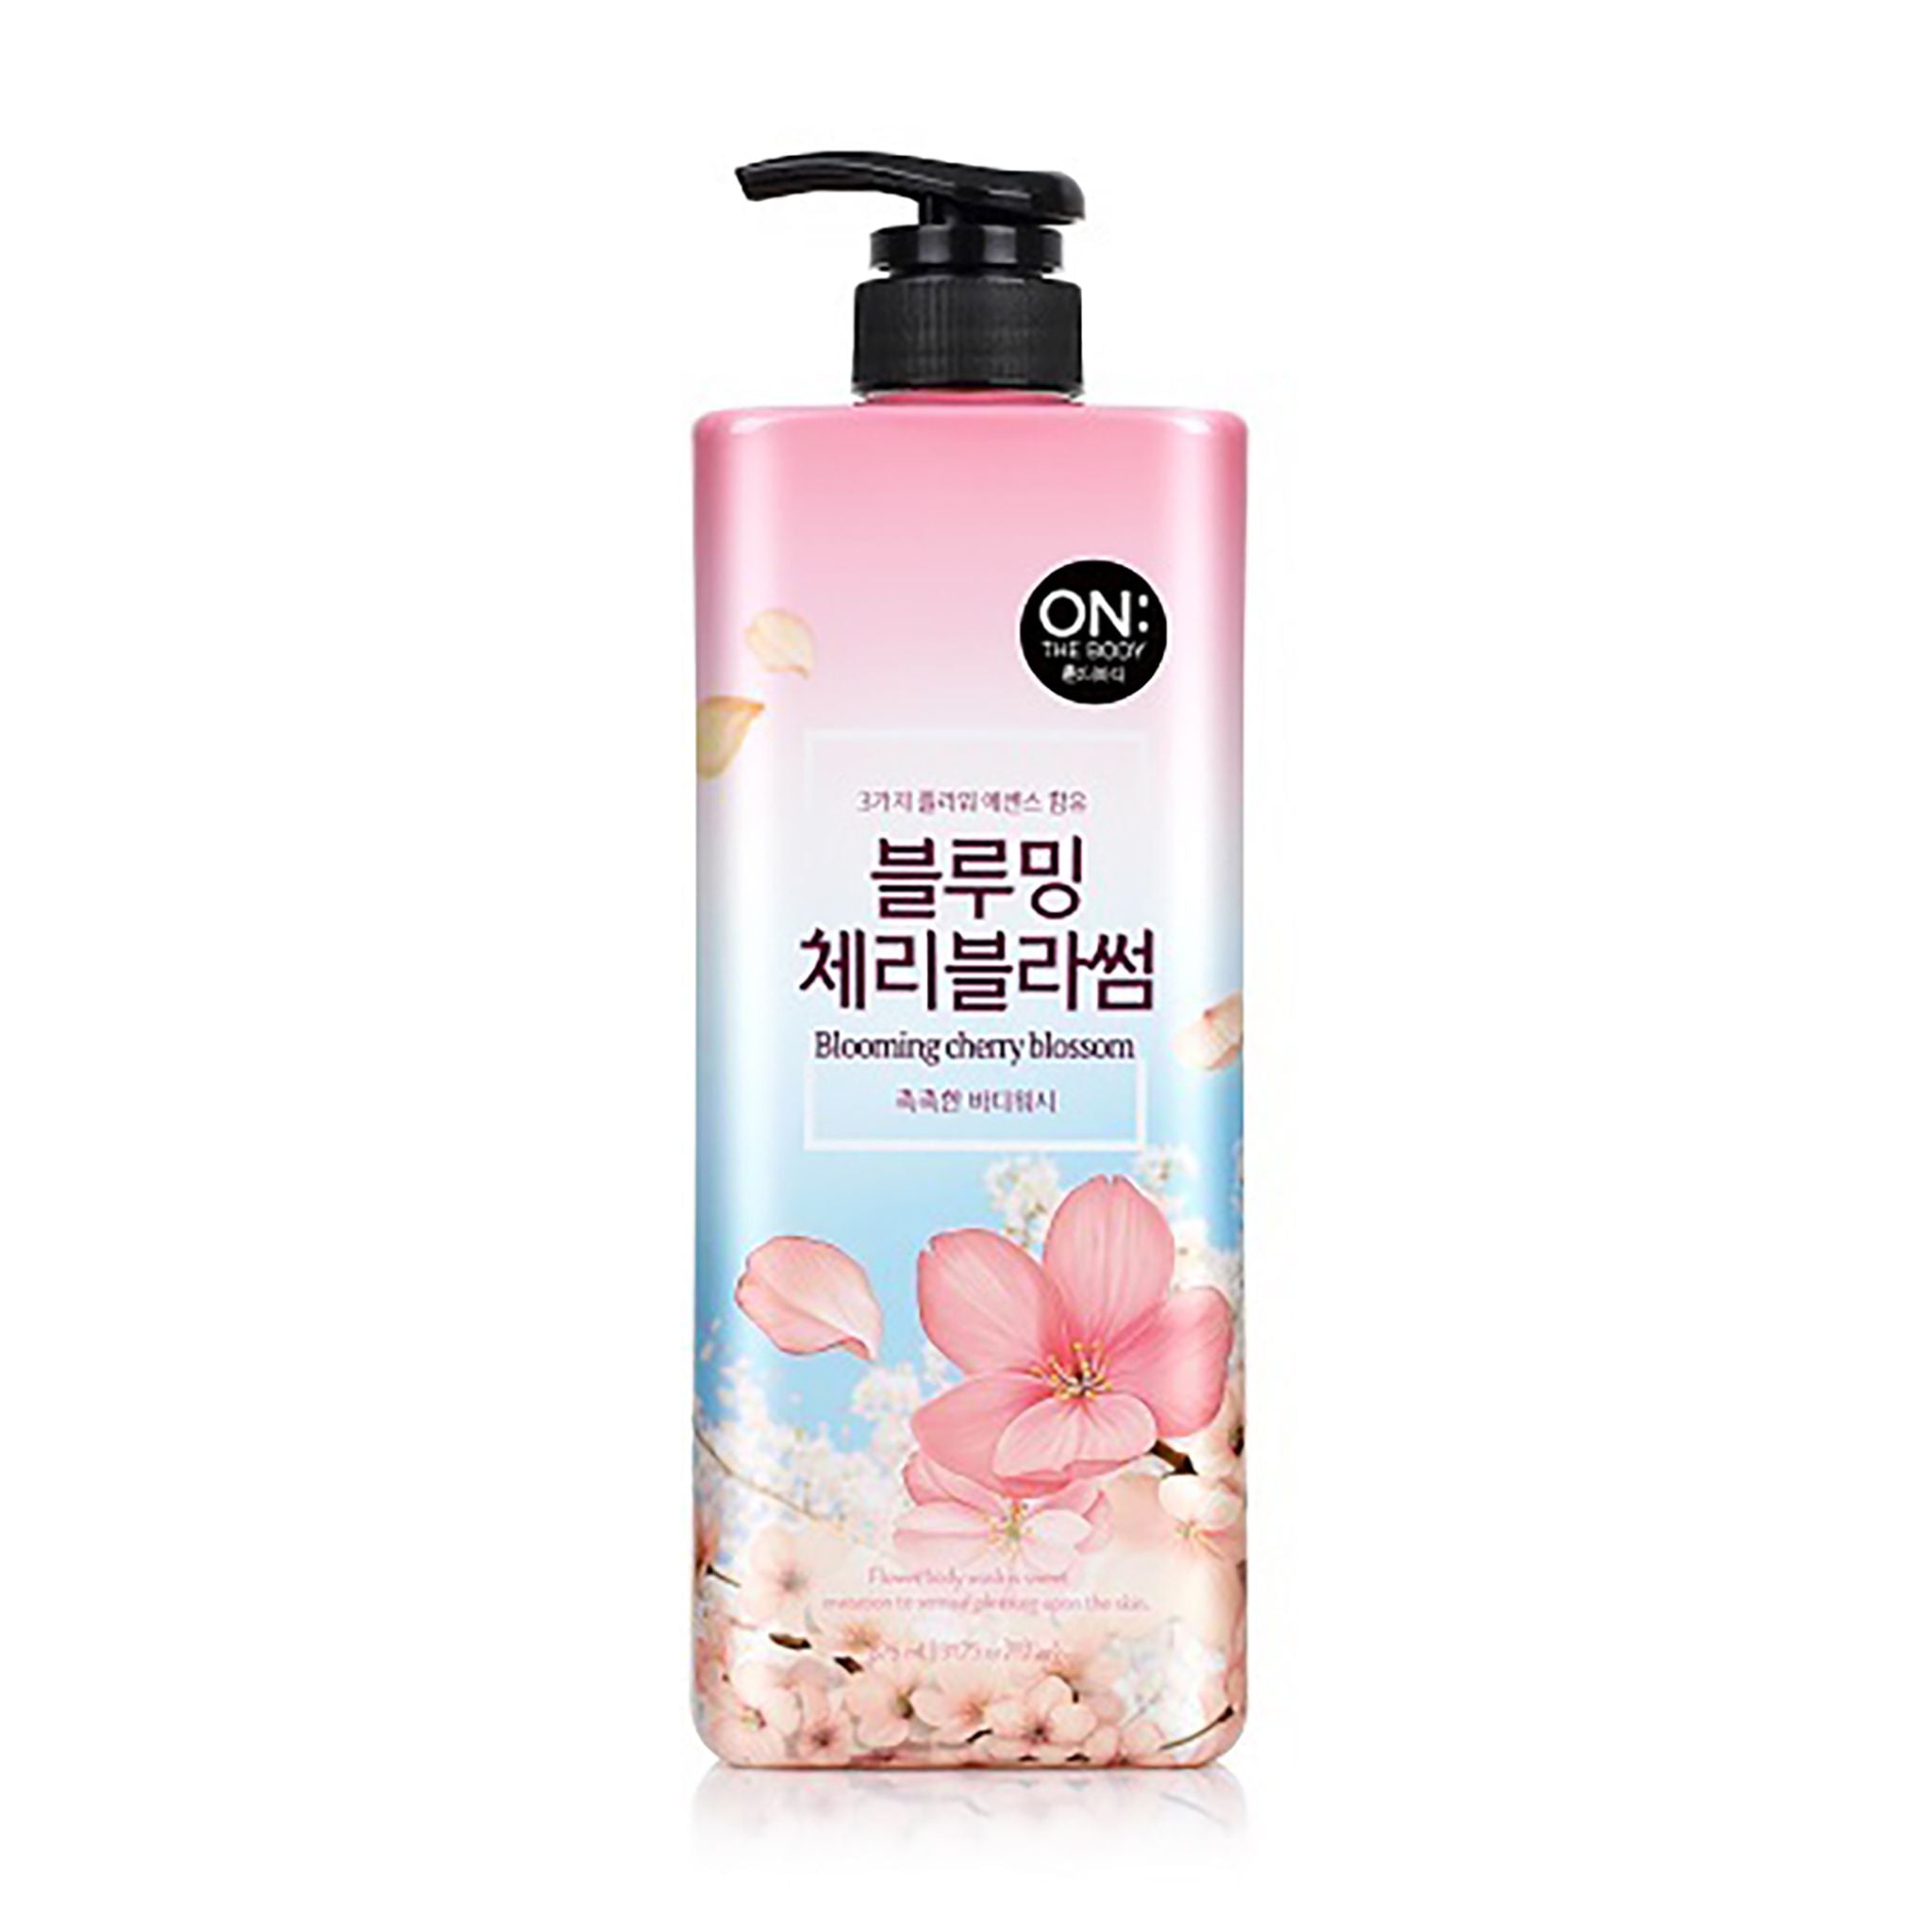 On The Body Blooming Cherry Blossom Body Wash 500mg